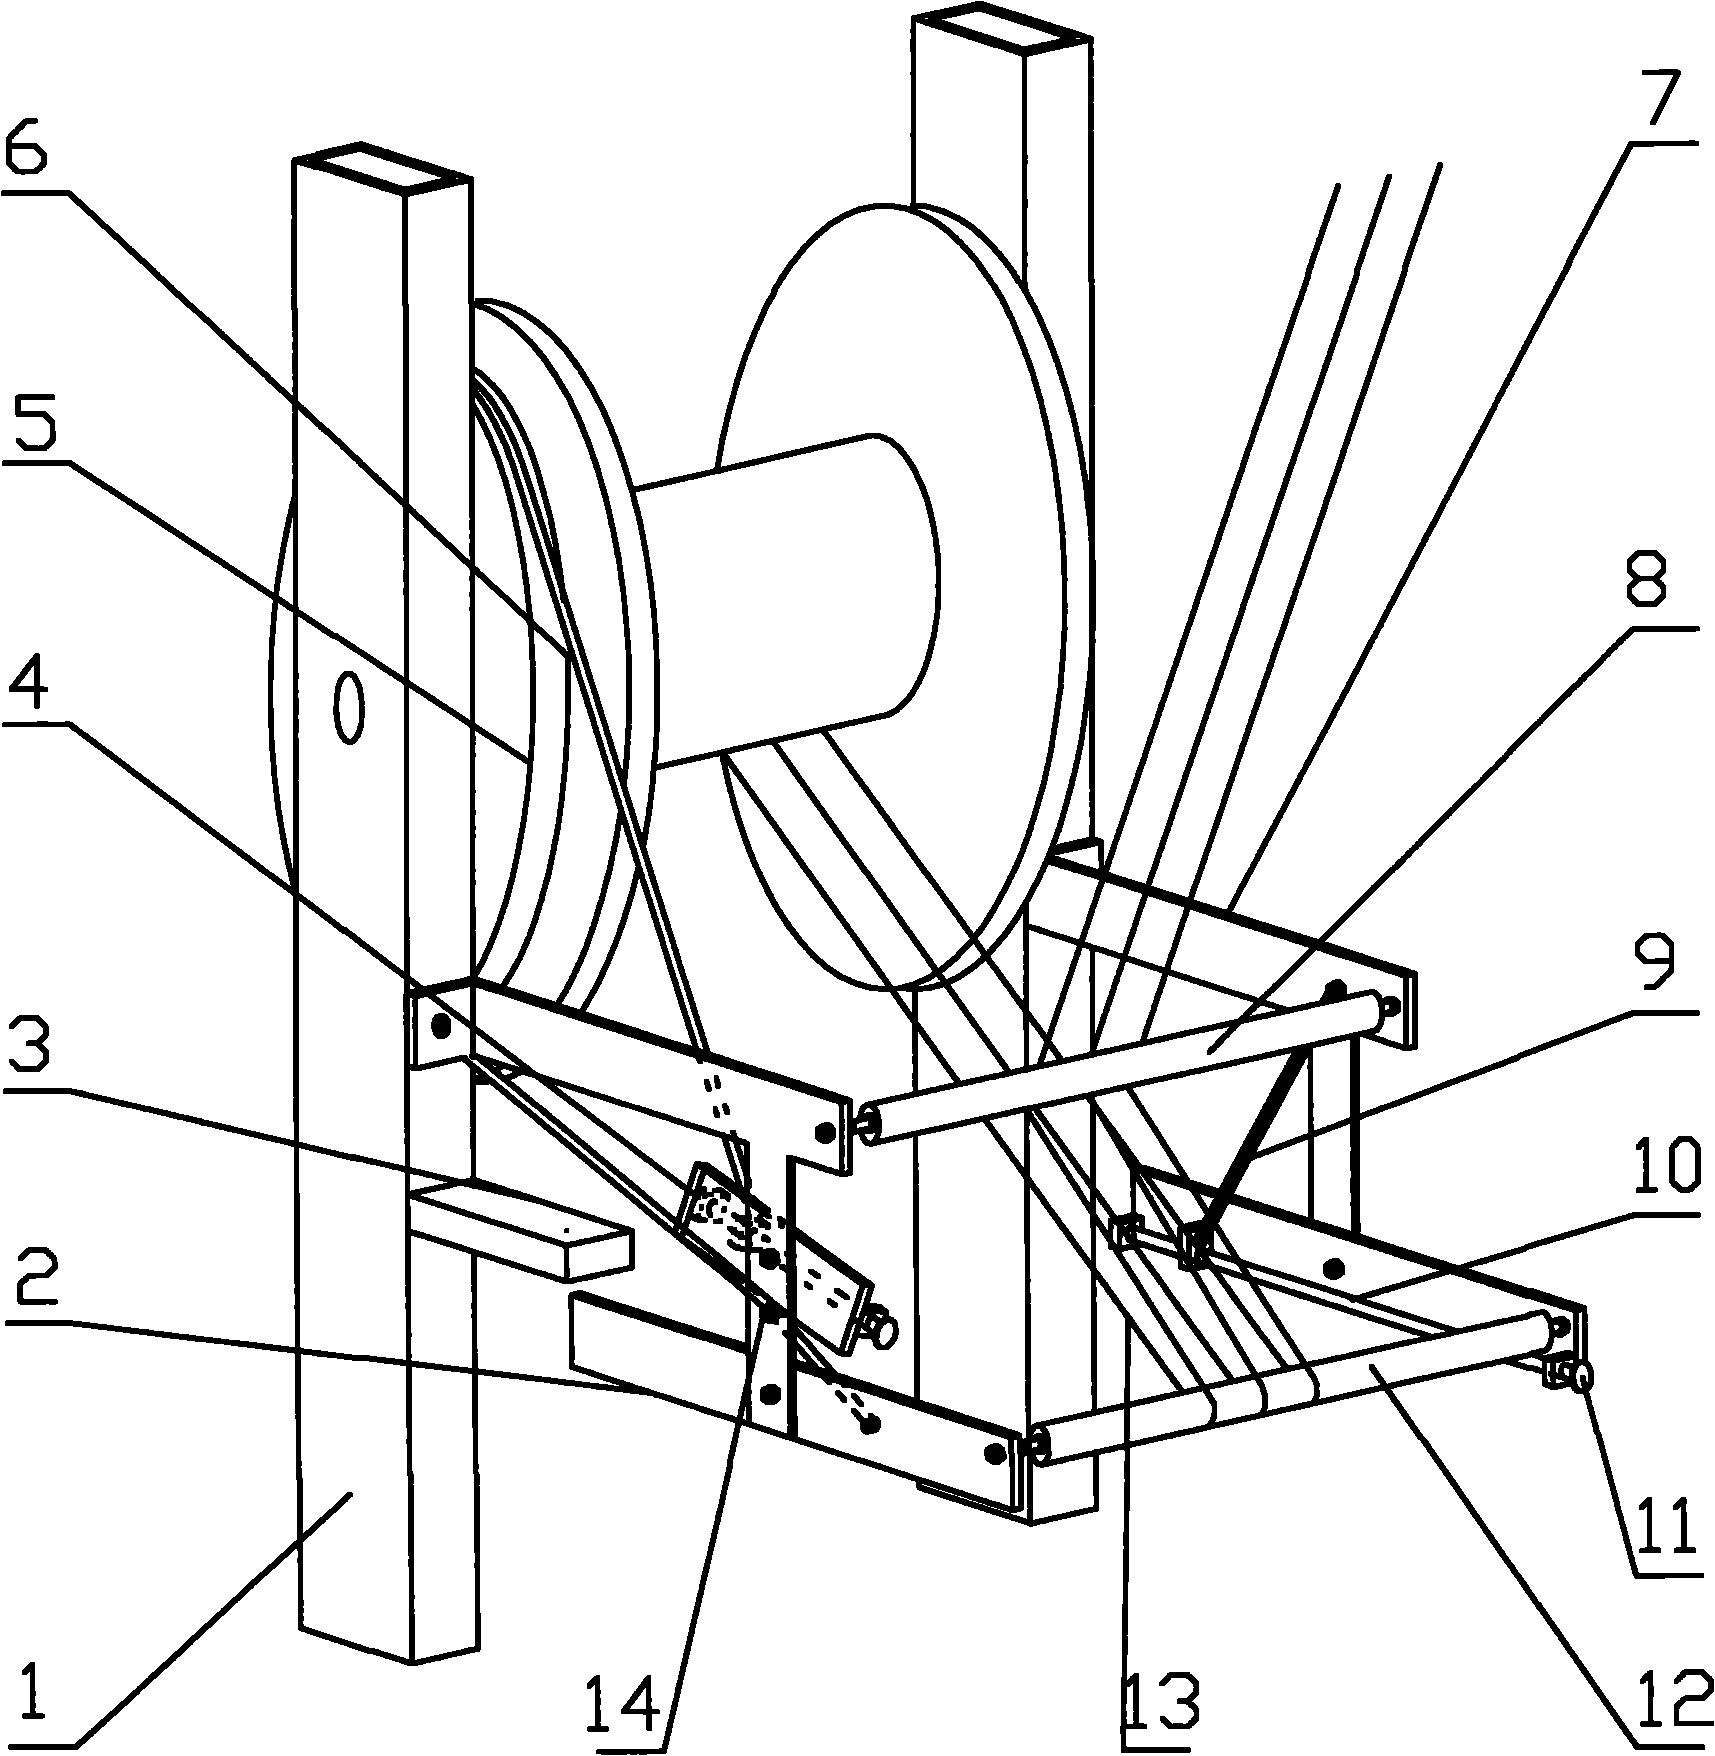 Device for controlling tension dynamic balance of warp thread of loom